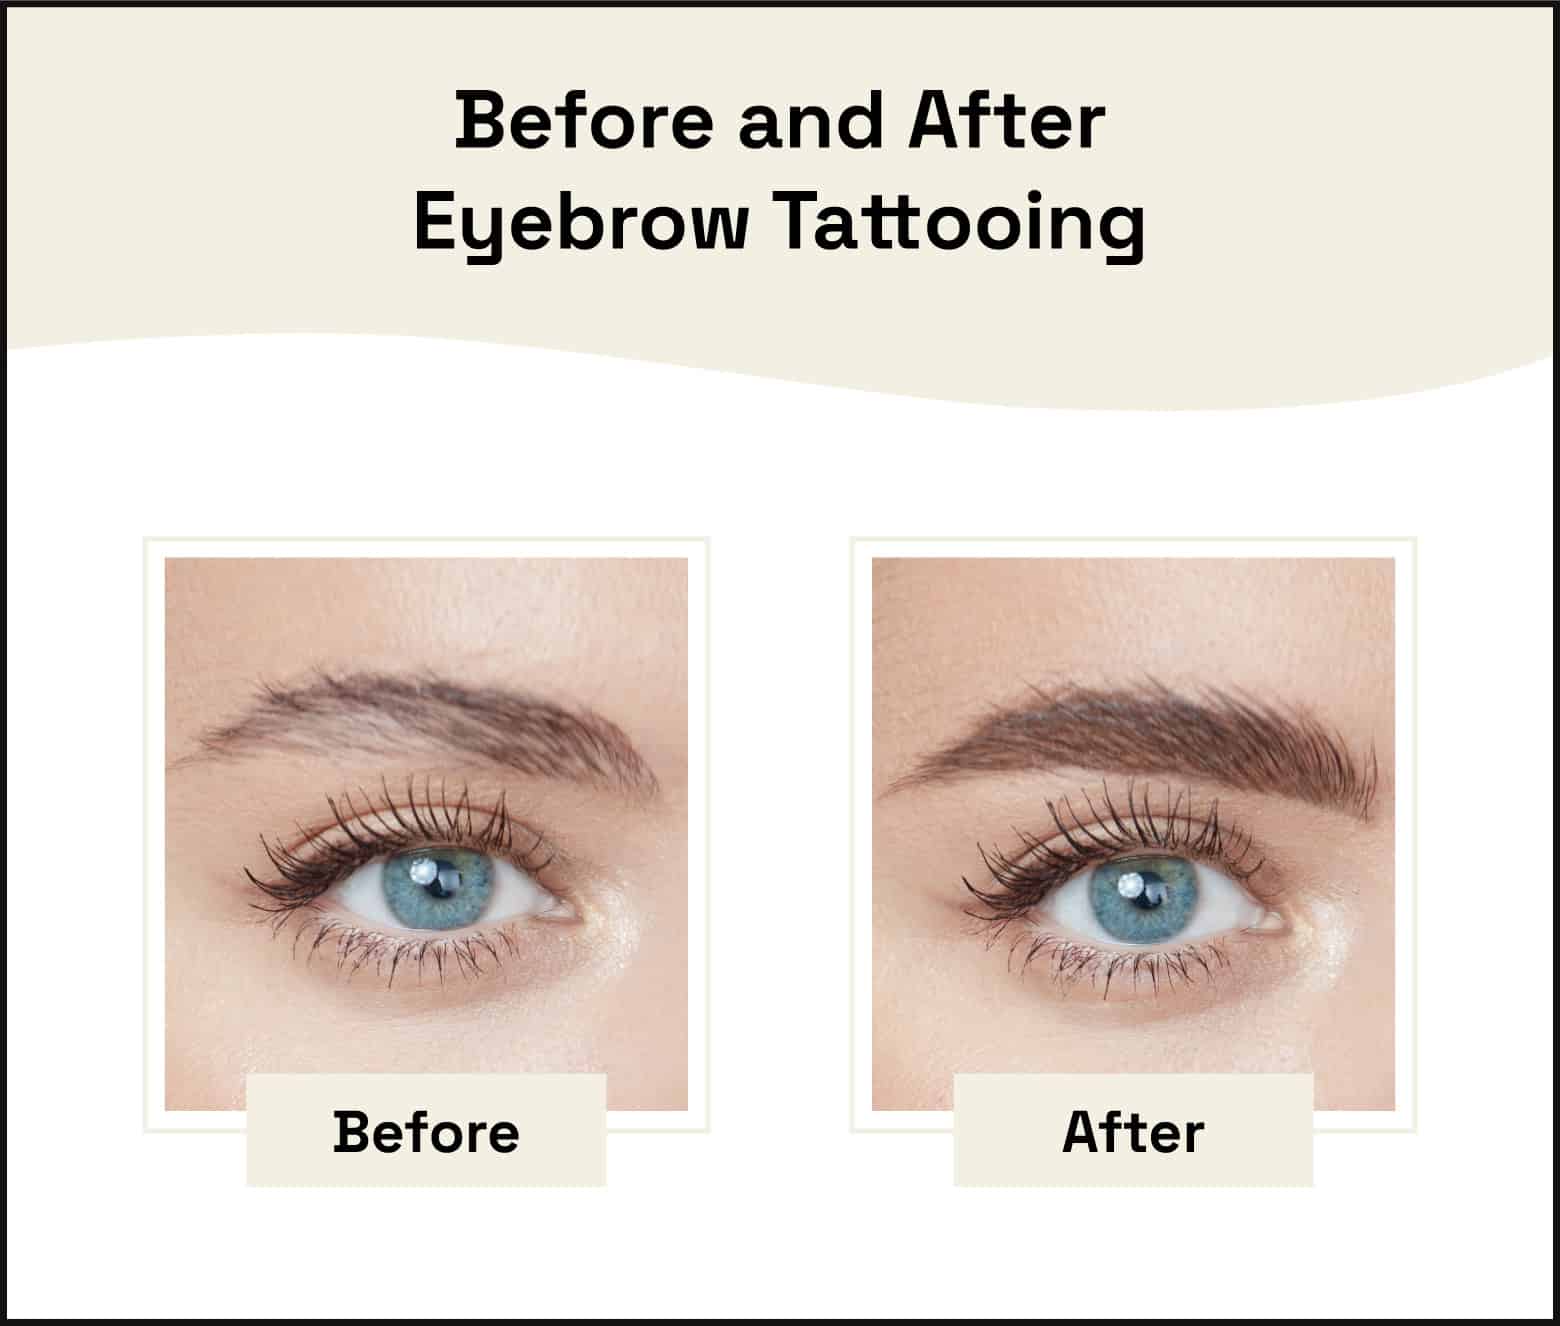 Two close up photos of a woman’s eyebrow show the before and after results of eyebrow tattooing. 